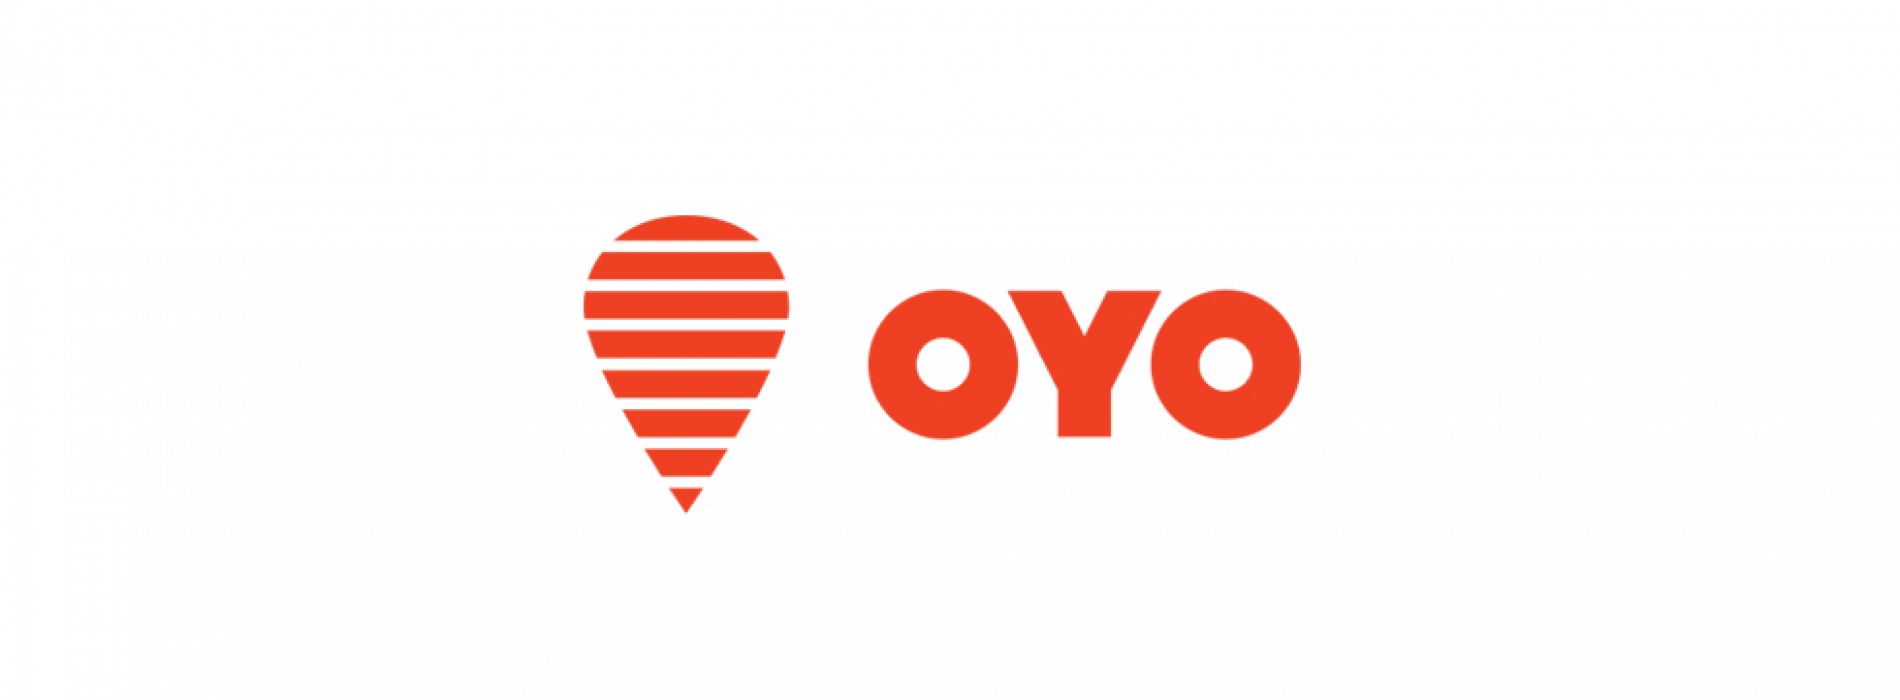 OYO customers have the choice to receive booking confirmation via WhatsApp